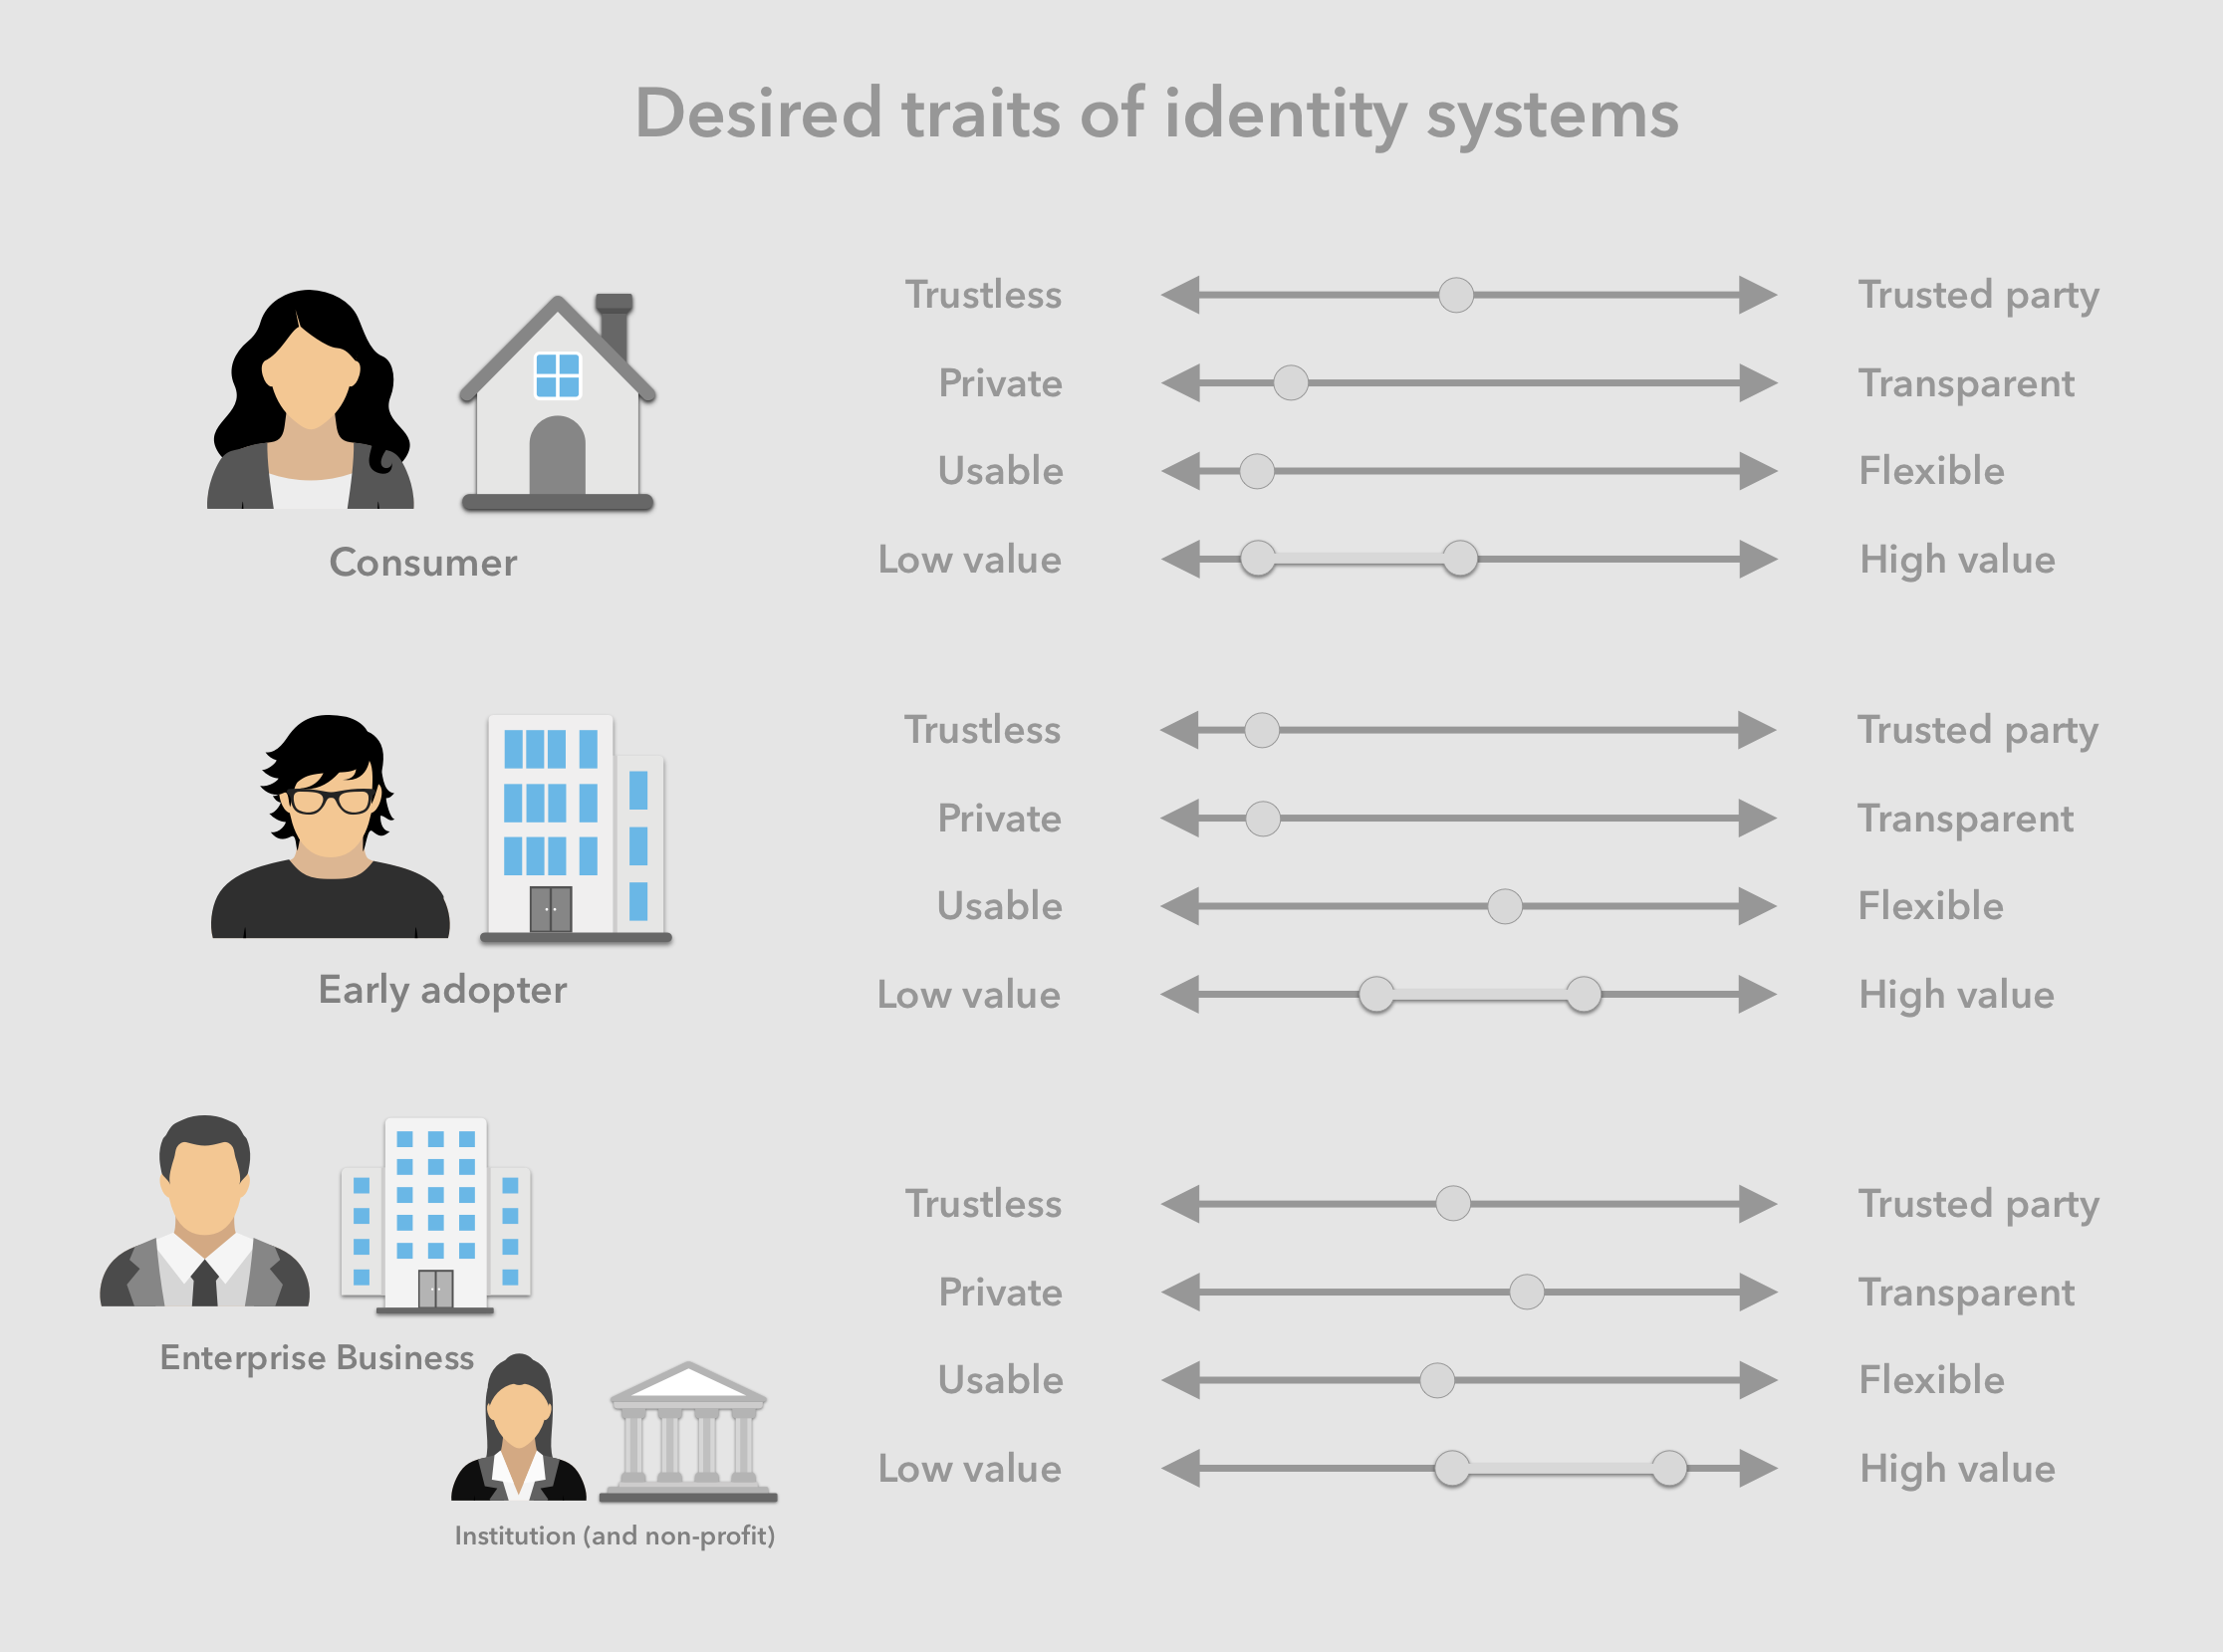 Identity owners' desired traits of an identity system